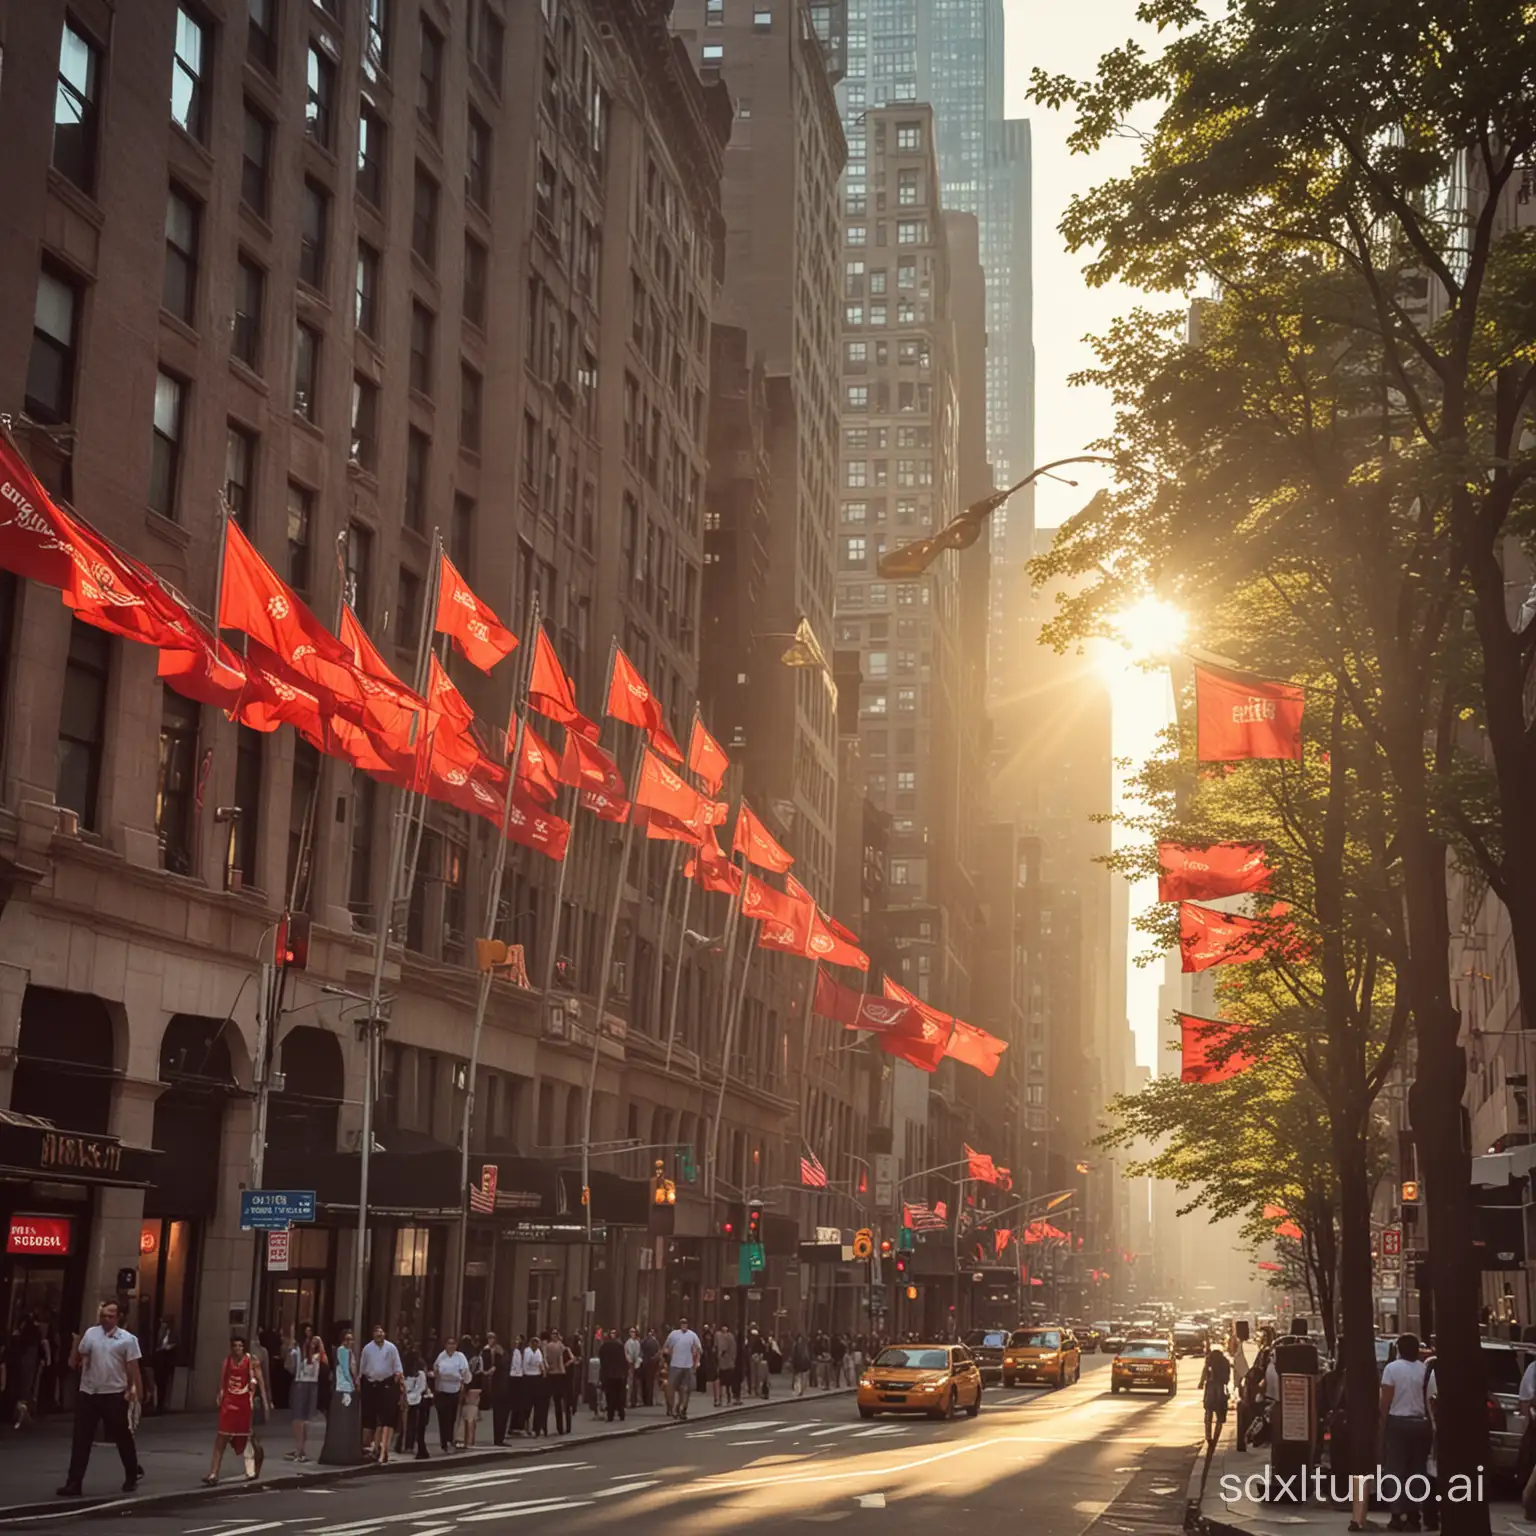 The sunlight shines, the red flags are planted all over New York.